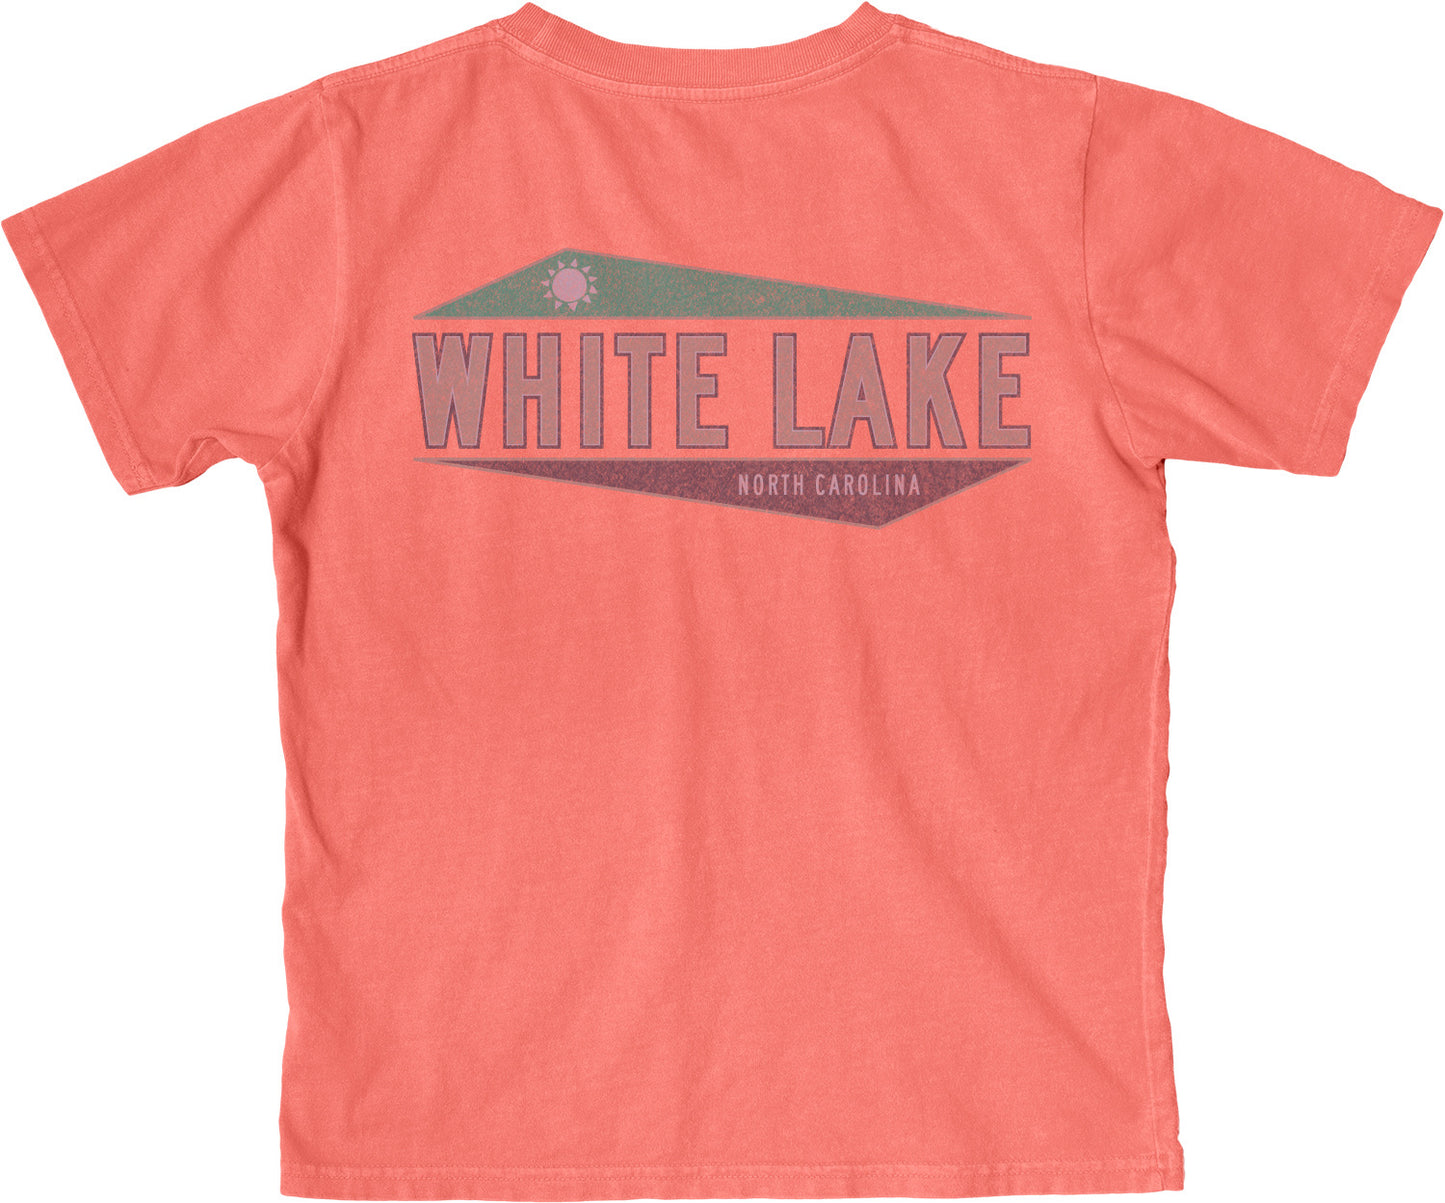 White Lake Tee Youth - Contraption Neon Coral